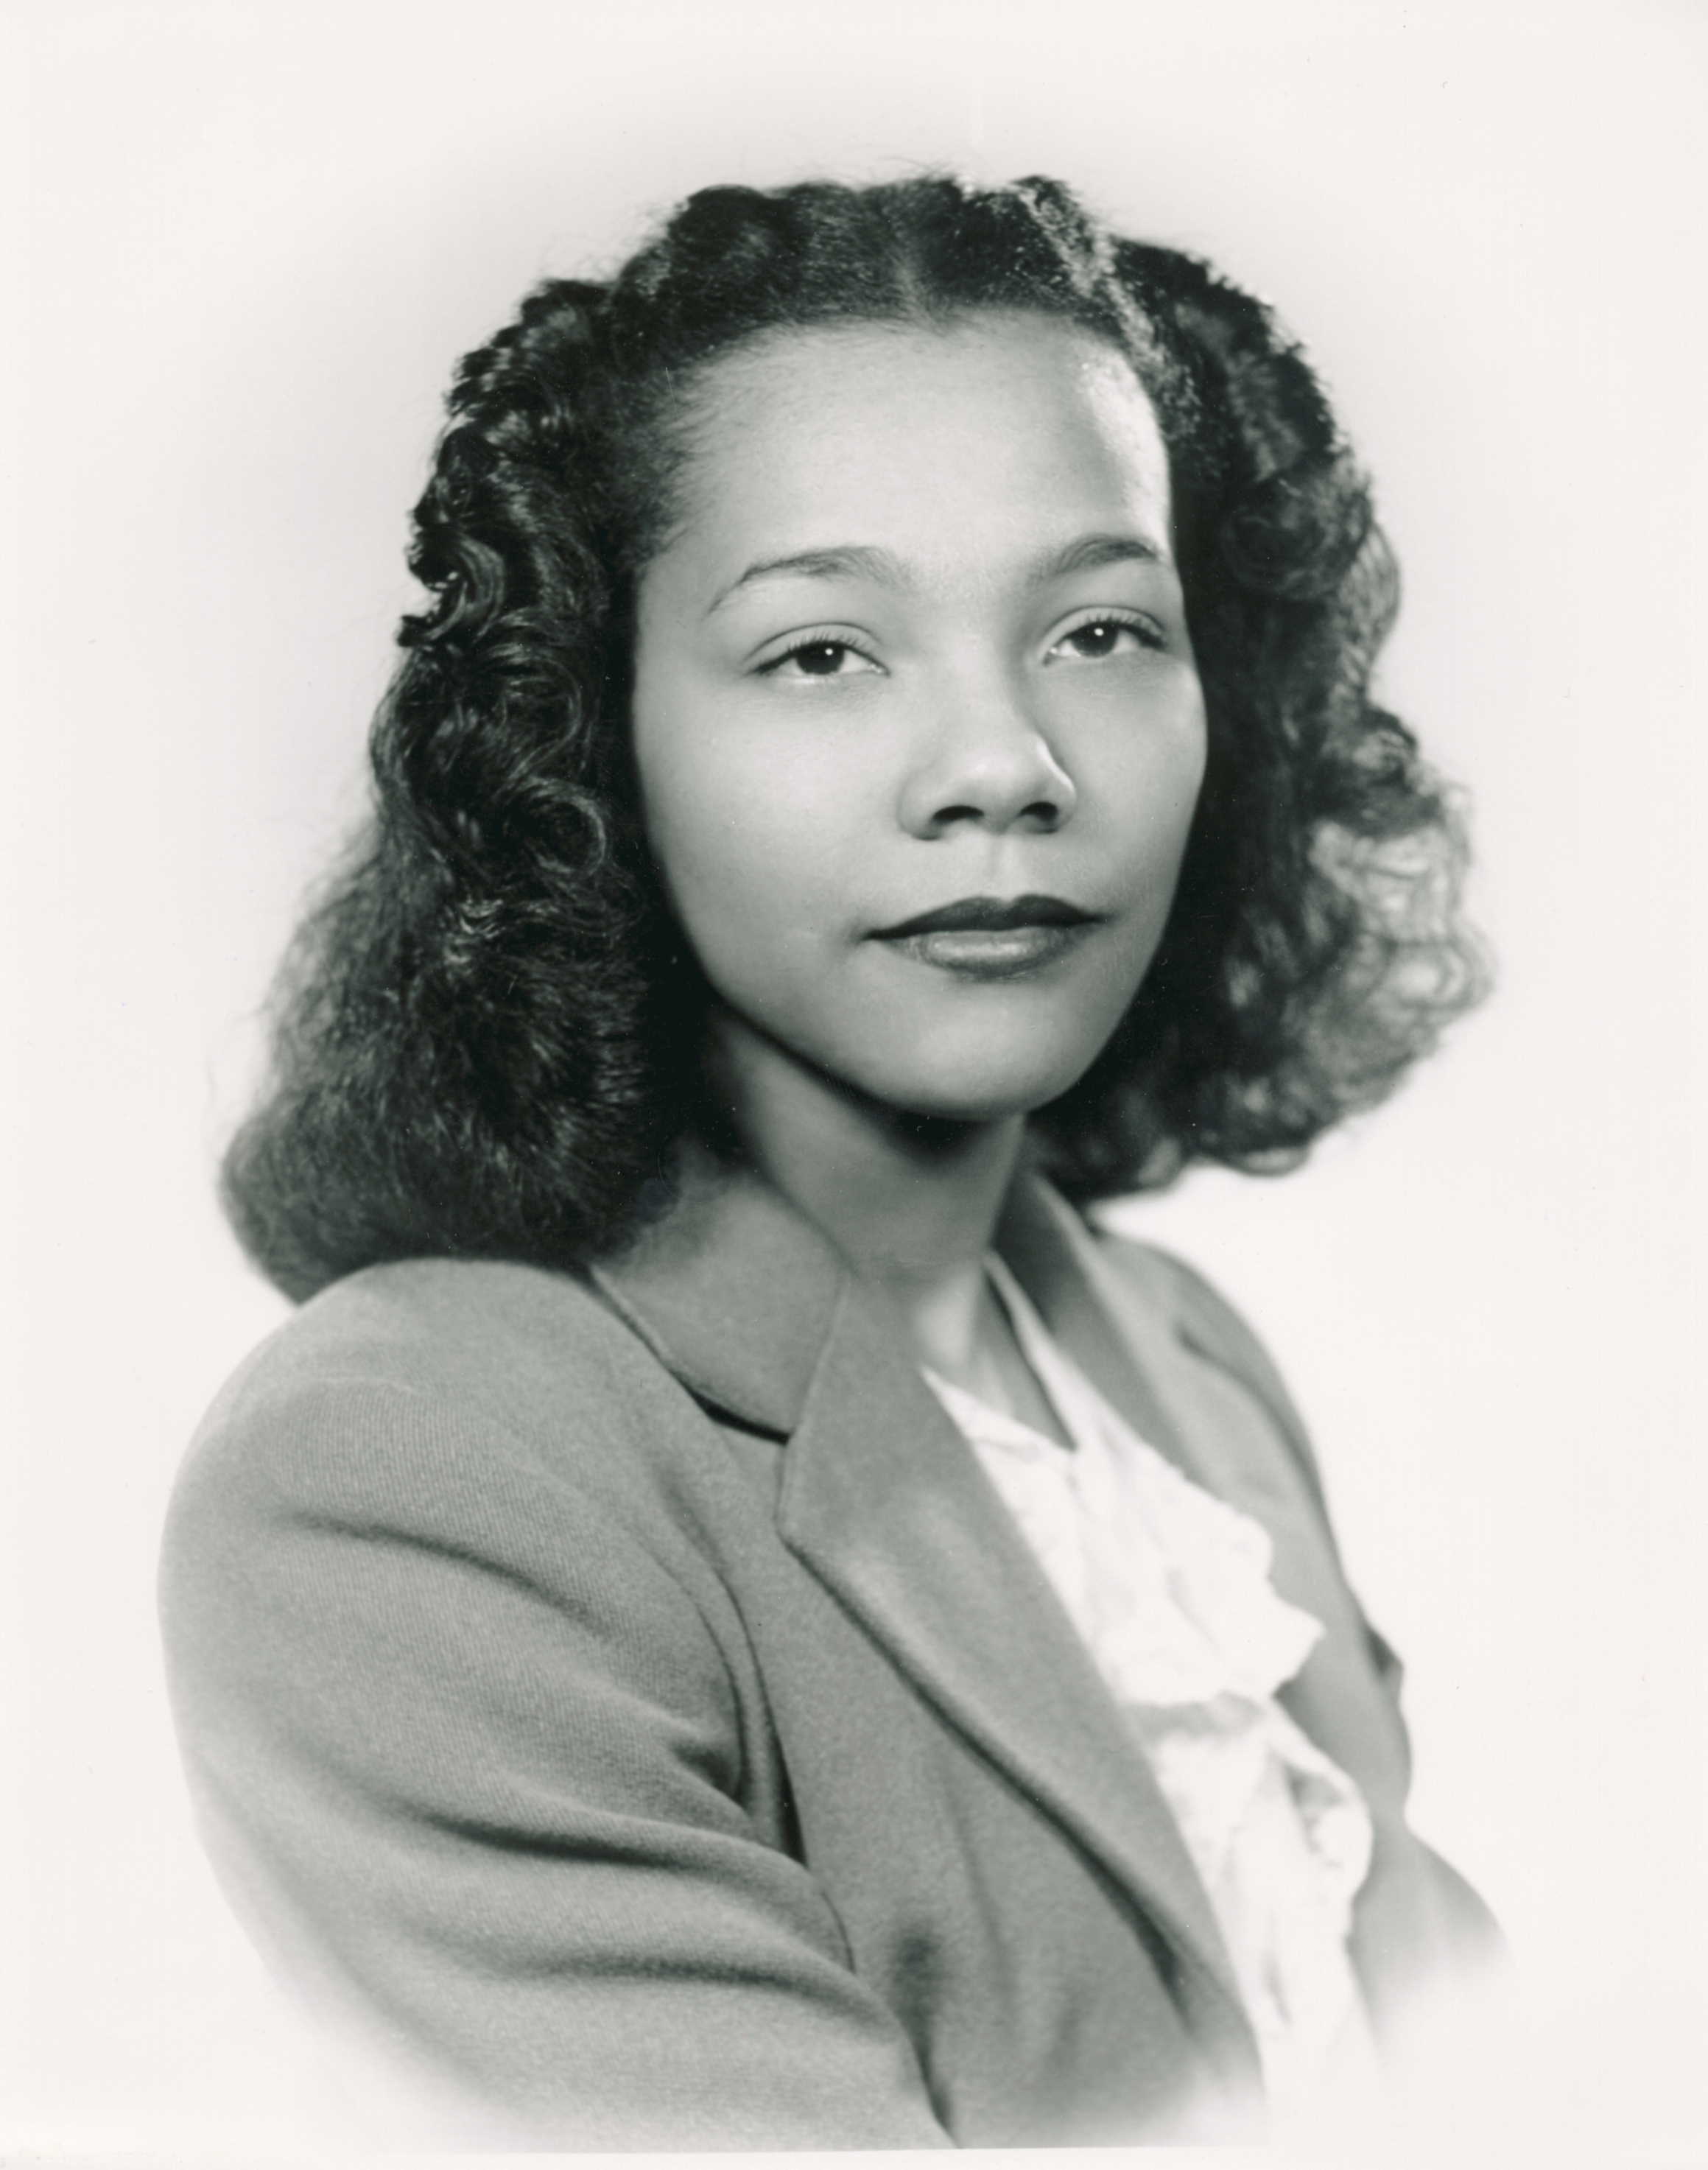 The picture featured above is of Coretta scott King in her early to mid